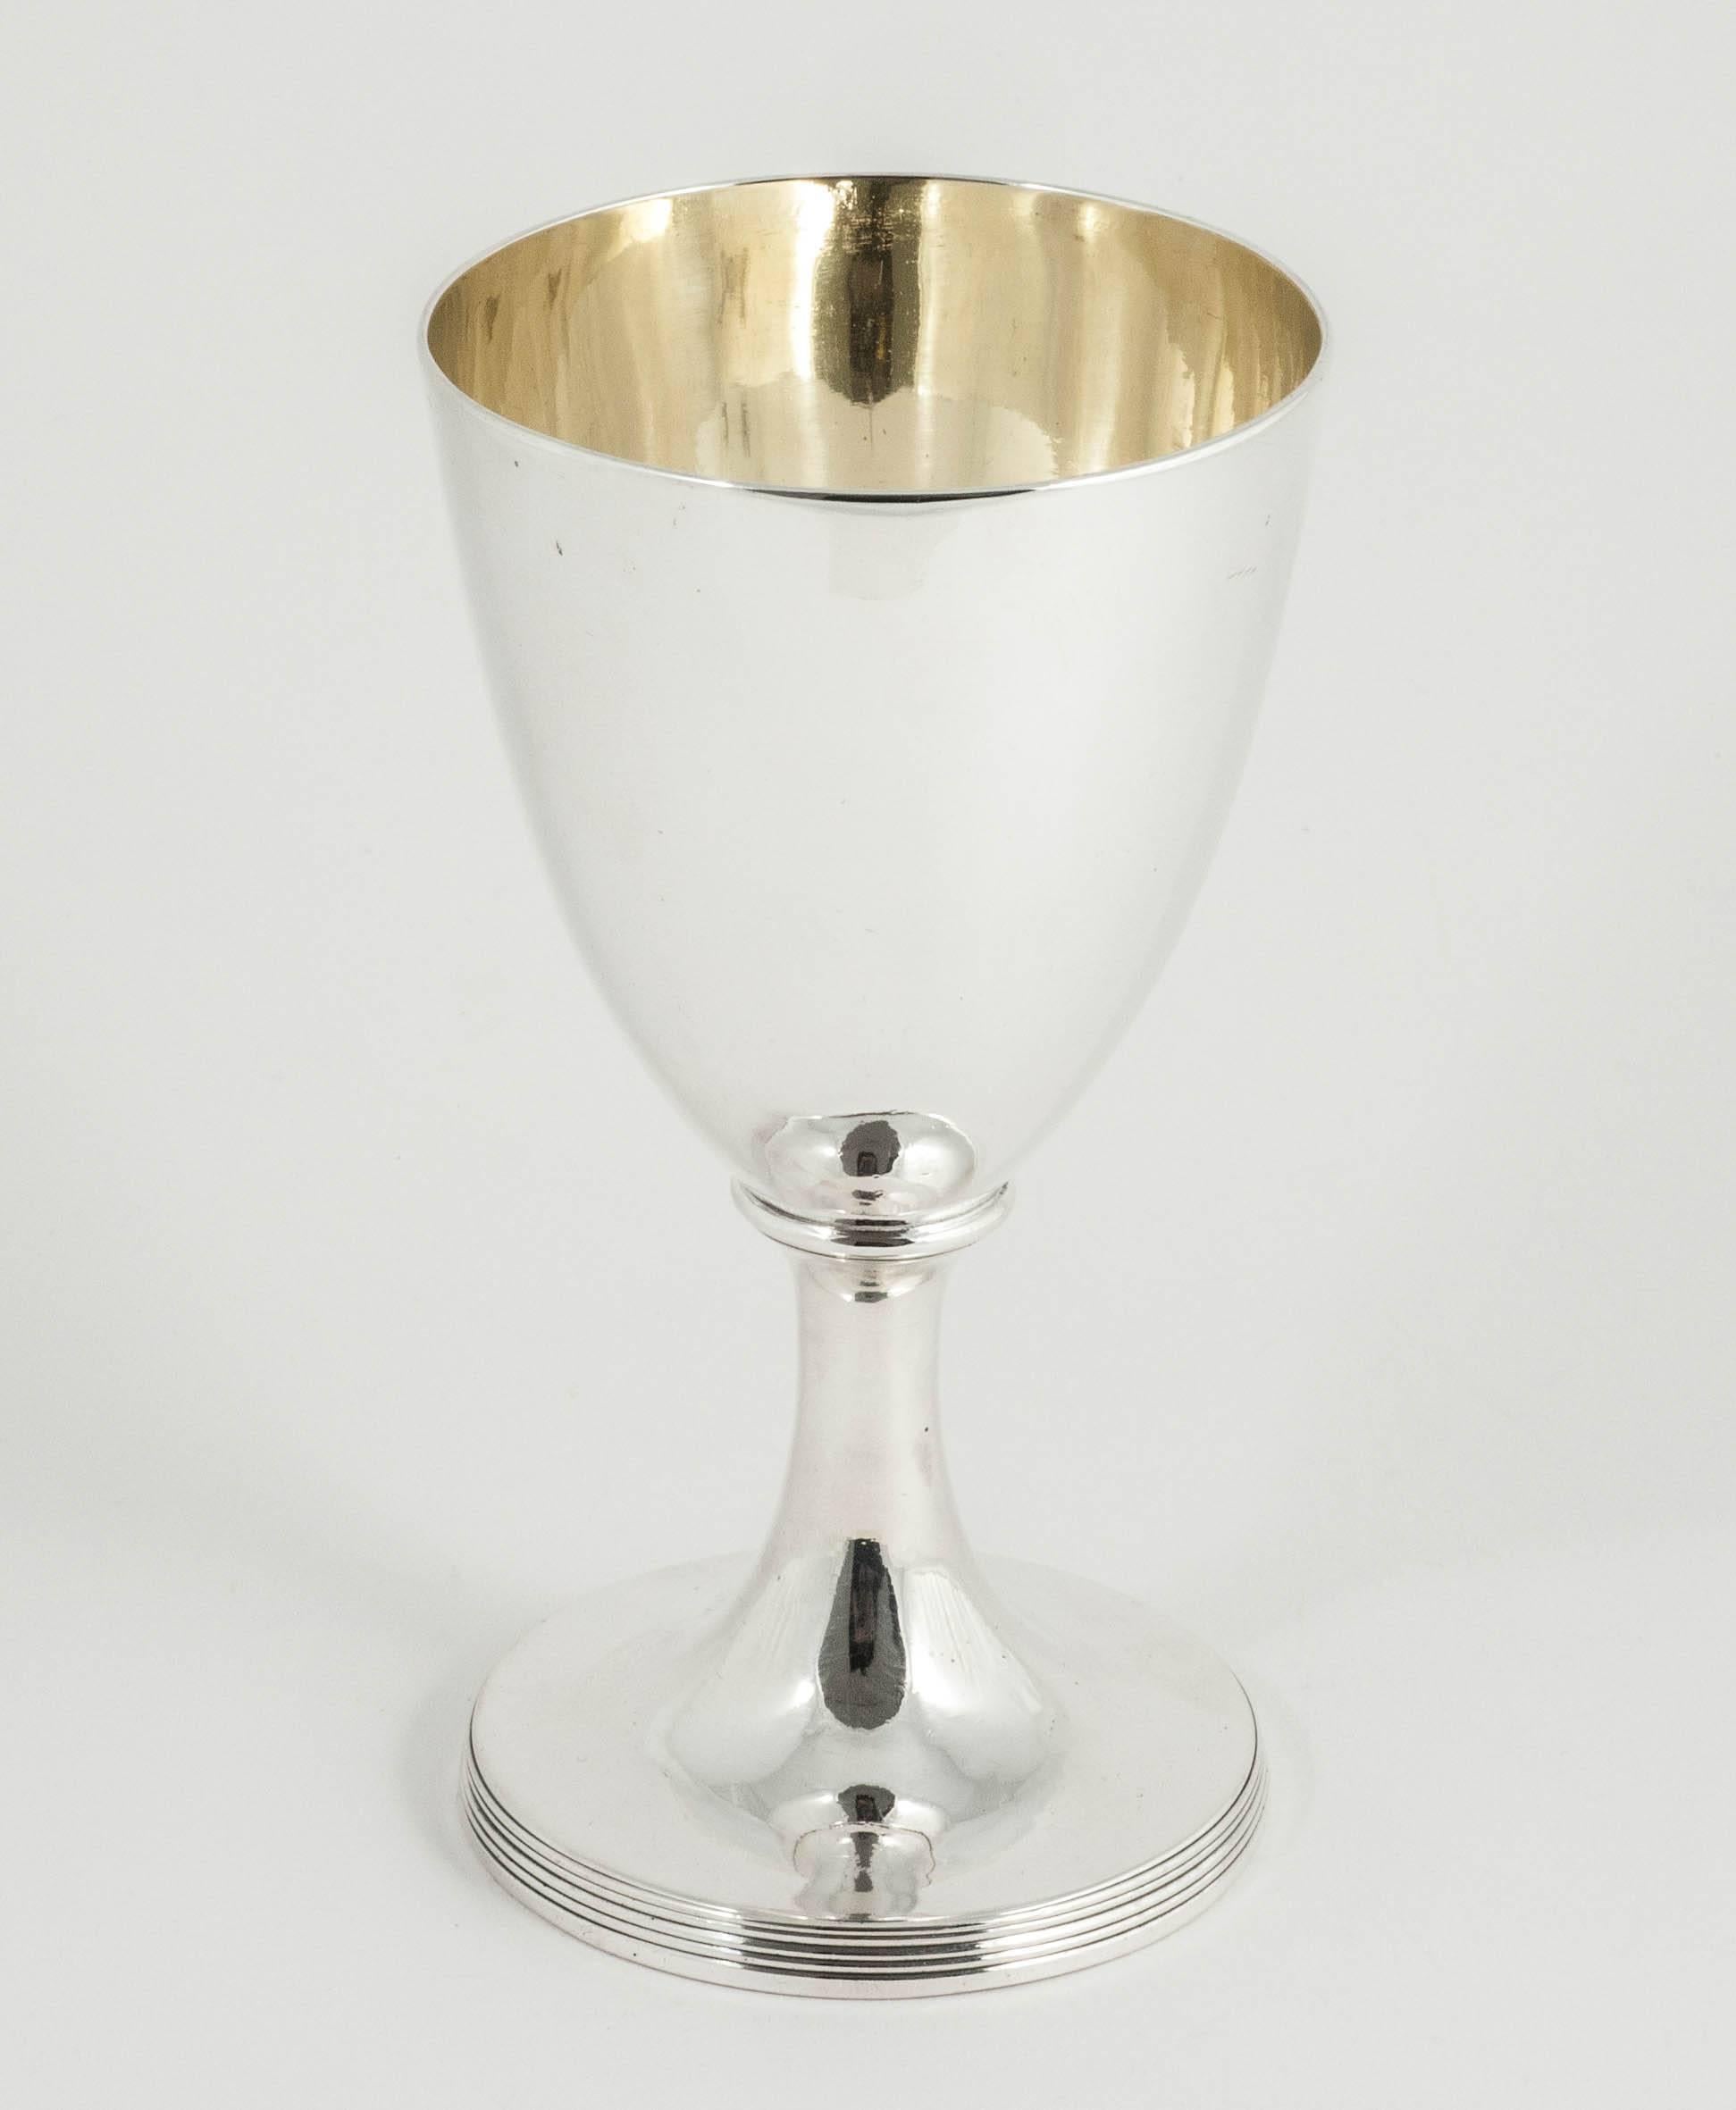 An elegant pair of Georgian sterling silver goblets of simple vase shape with spreading foot and a subtle thread pattern at the base. This style is a classic George III design and these examples are in wonderful condition with gold-plated interiors.